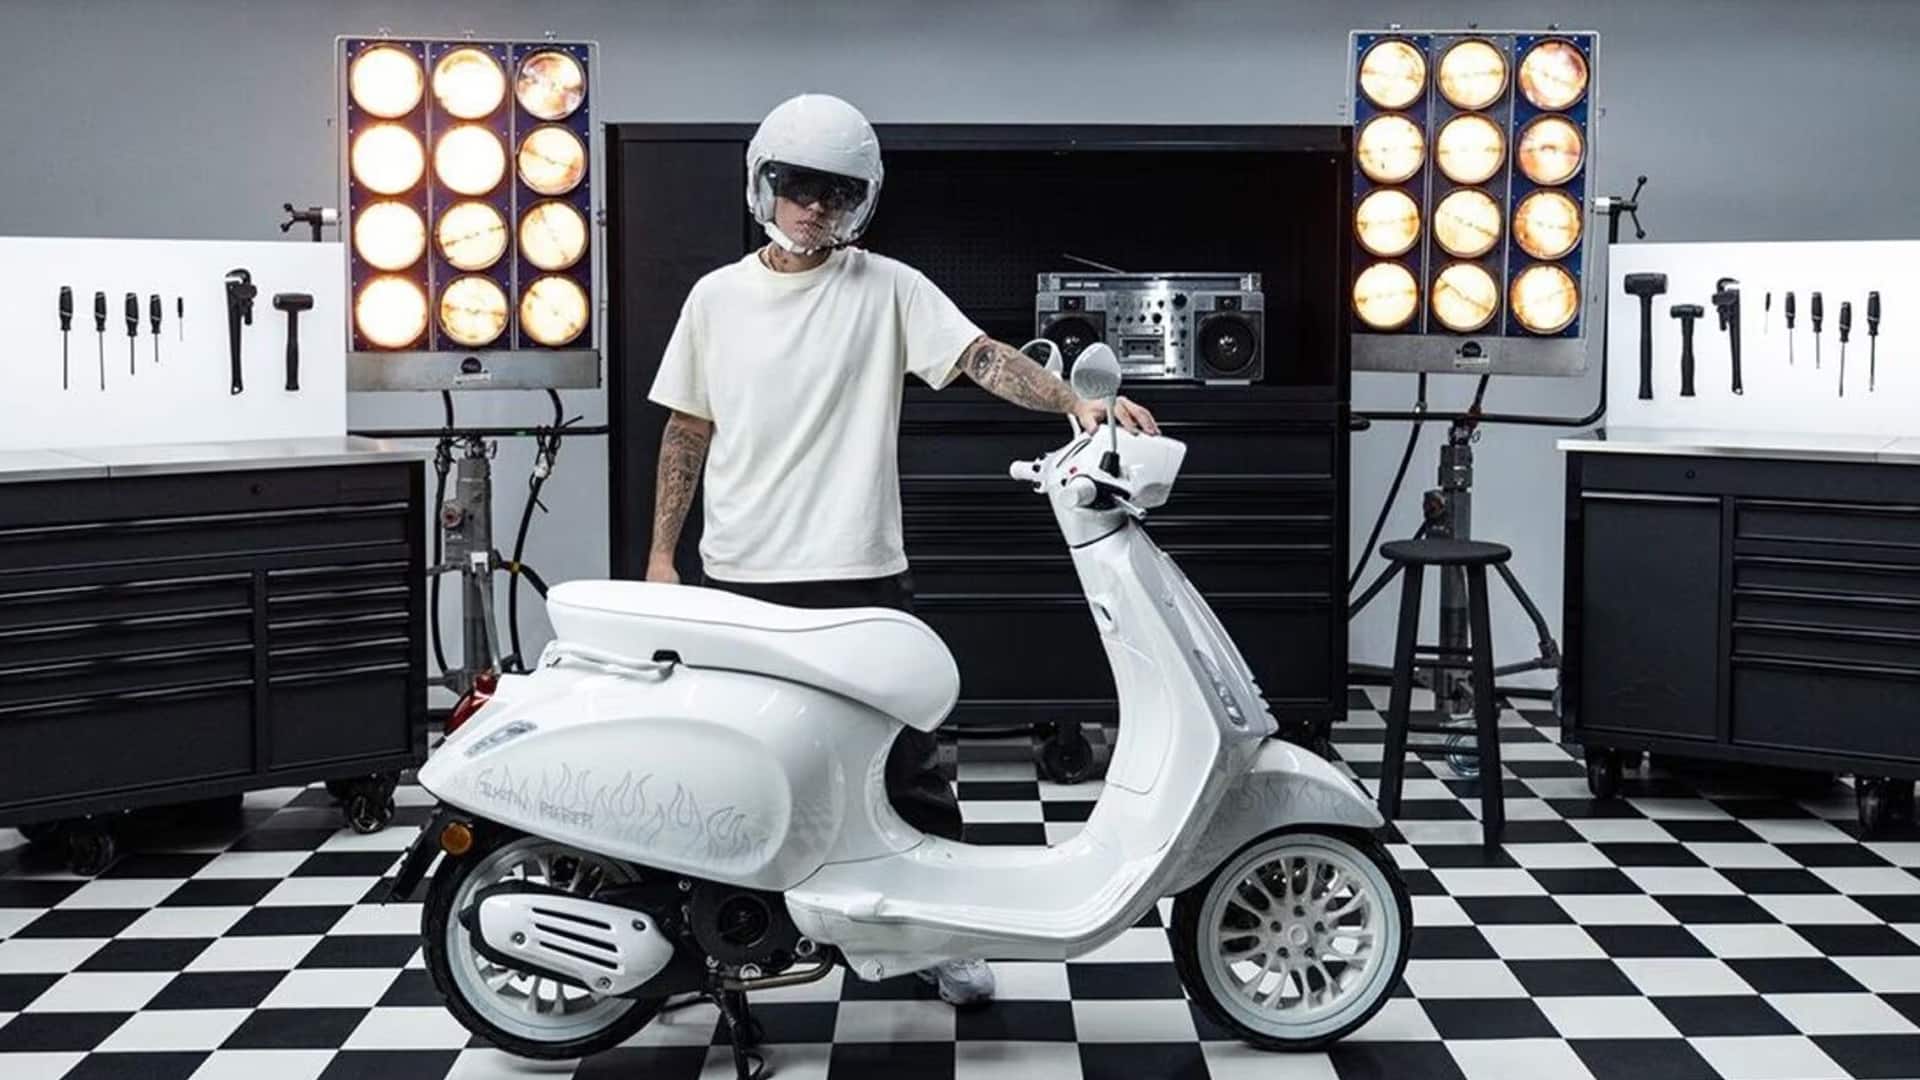 Piaggio Vehicles launches JUSTIN BIEBER X edition Vespa Scooter in India; price starts at Rs 6.45 lakh